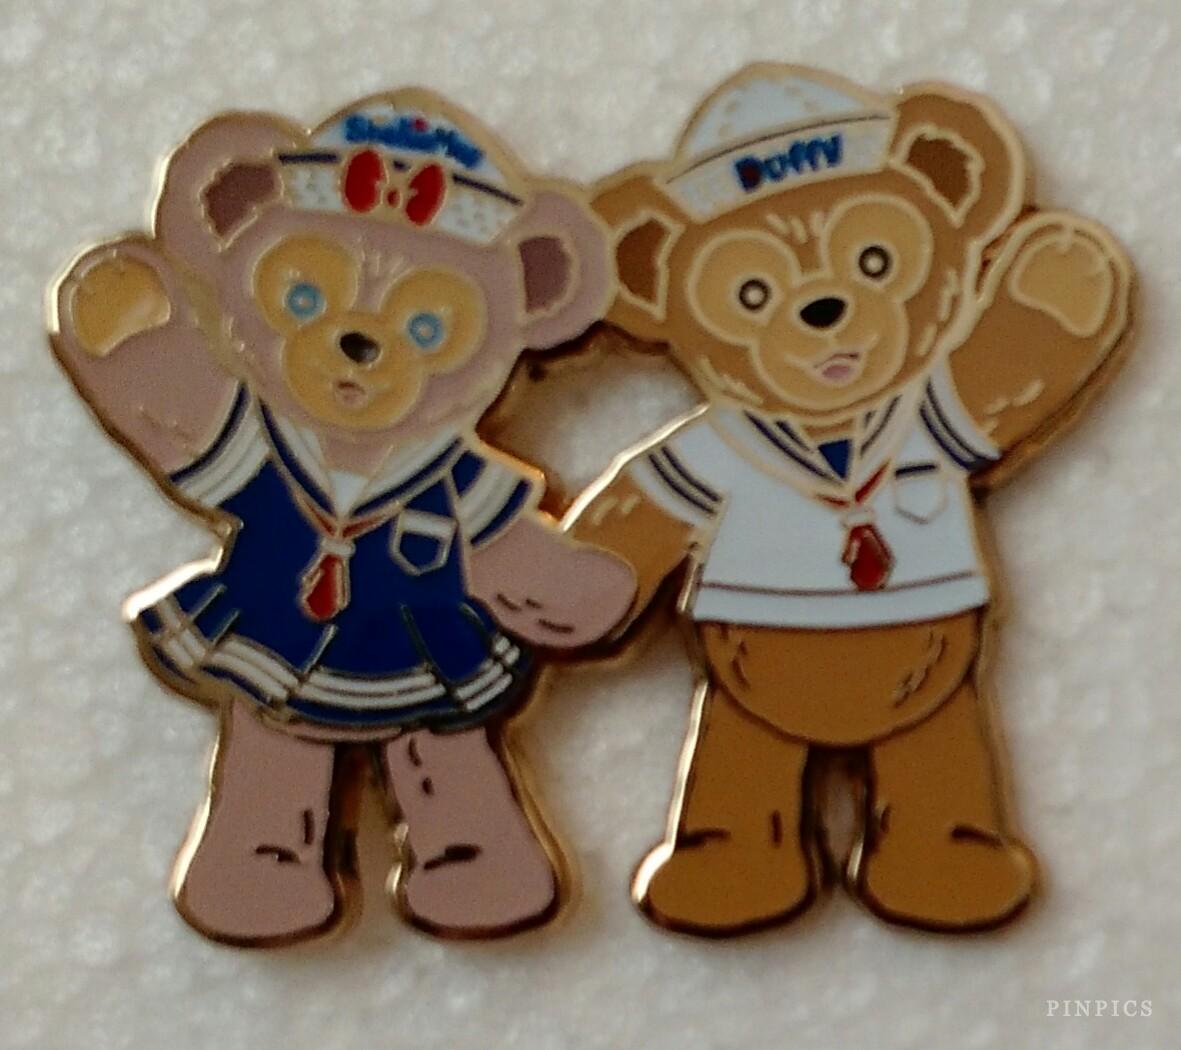 HKDL - Duffy and ShellieMay Mystery Tin Collection - Sailor Duffy Shellie May standing